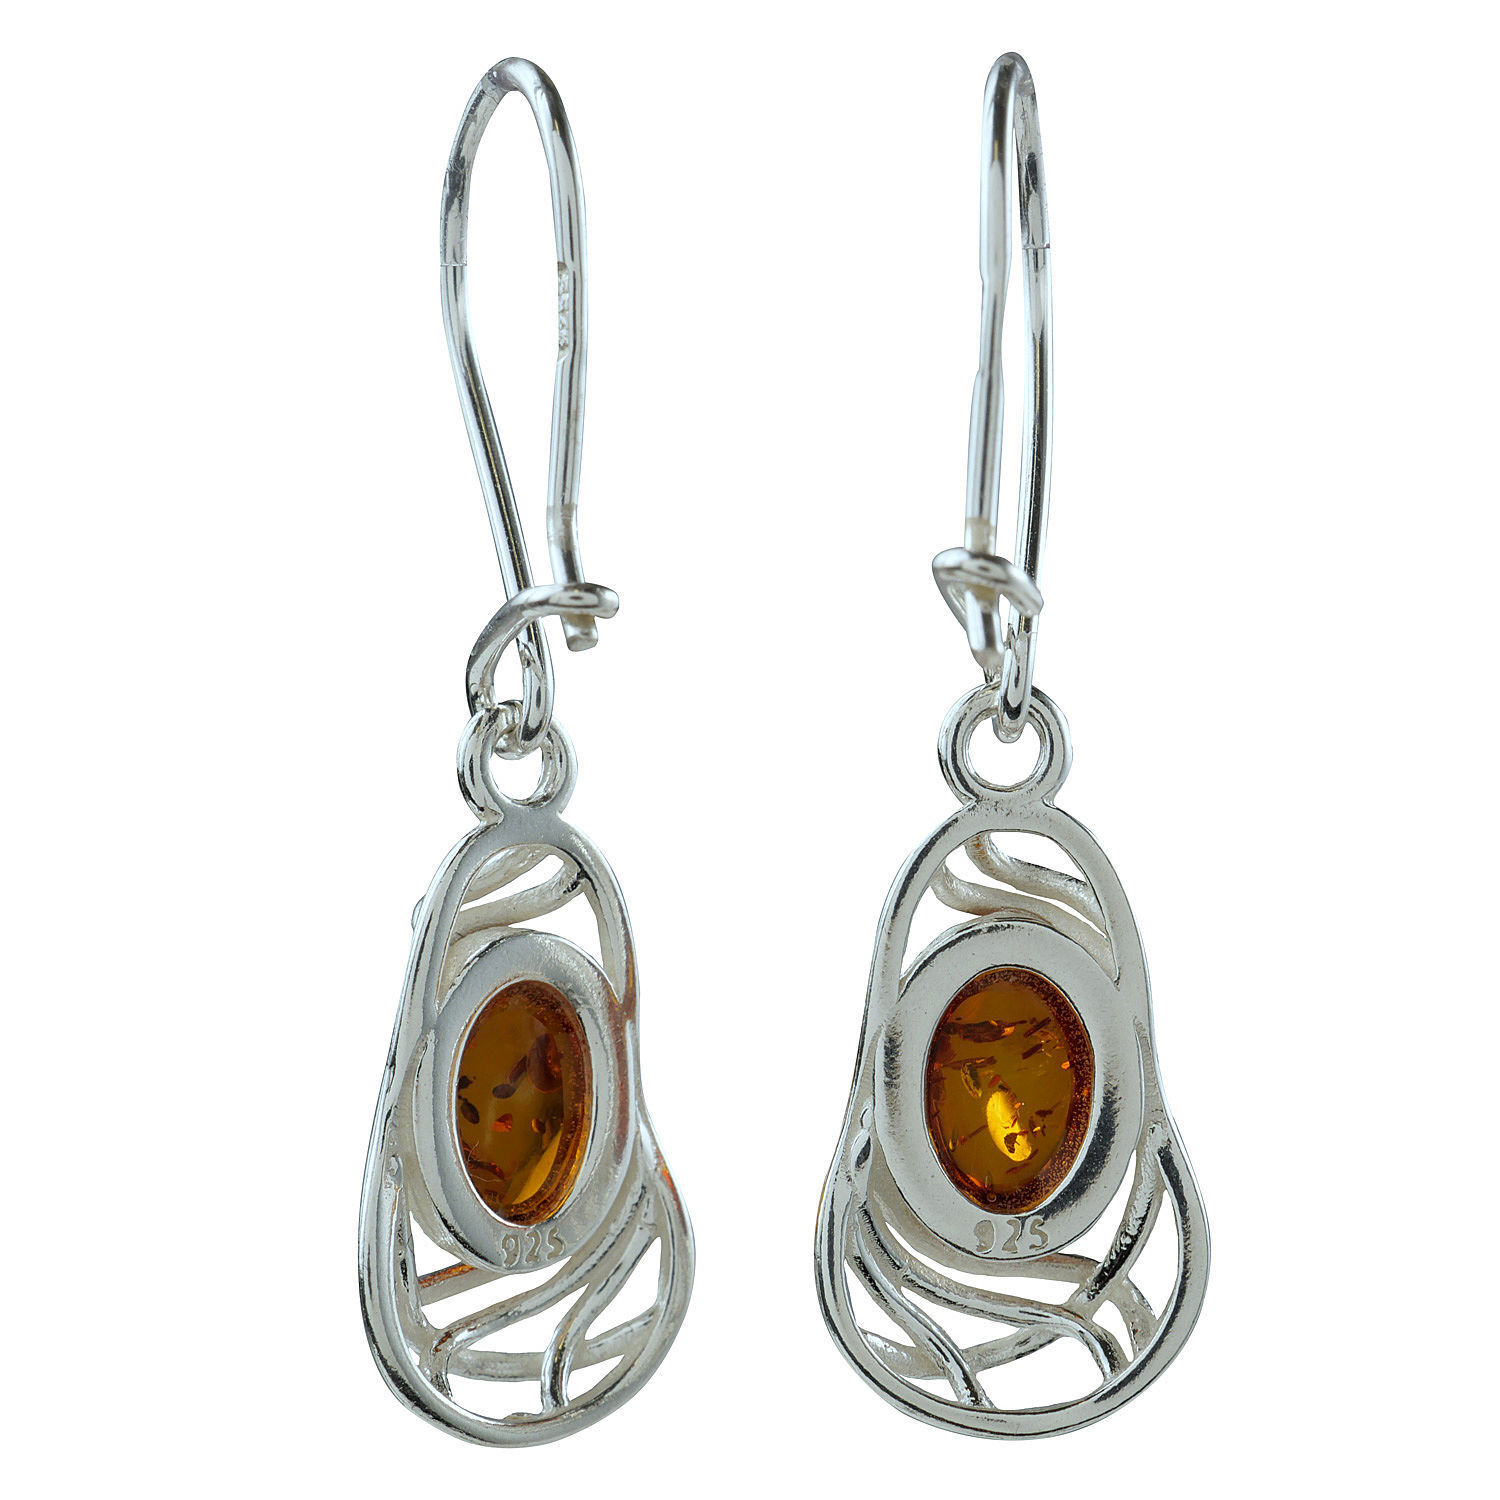 Amber Jewelry - Sterling Silver and Baltic Honey Amber Earrings 